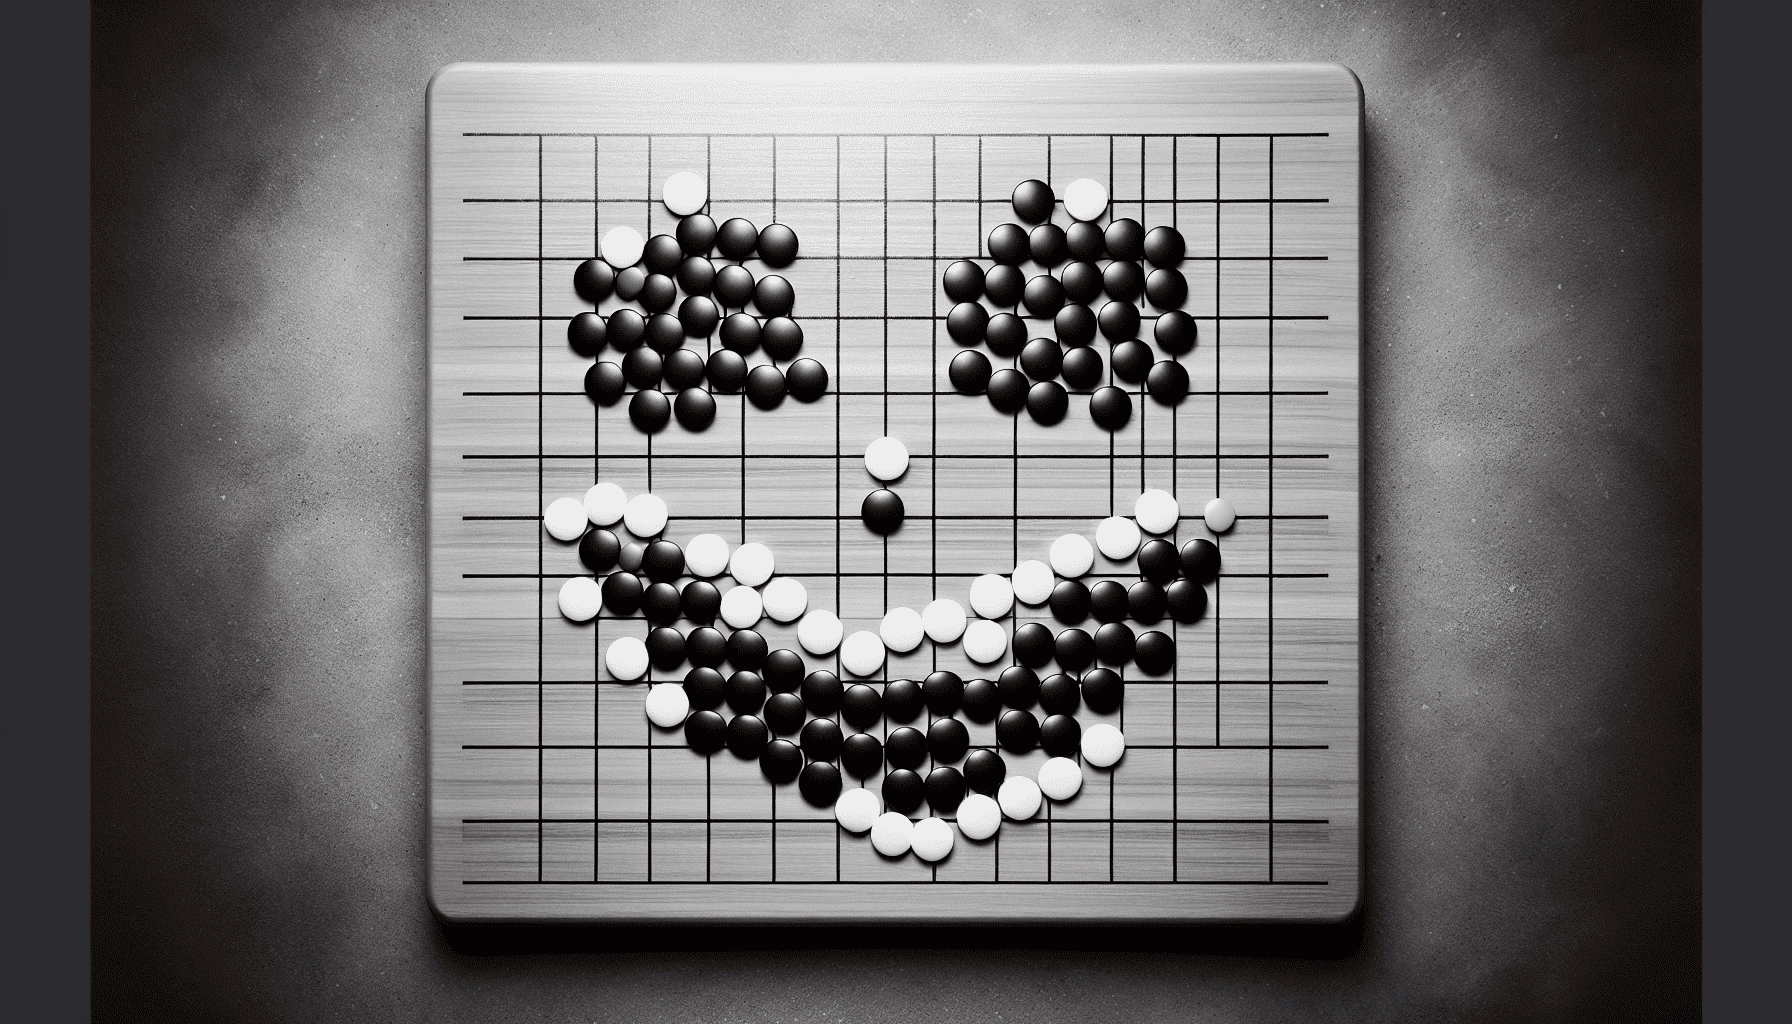 A black and white photo of a Go board with the winning stones forming a happy face